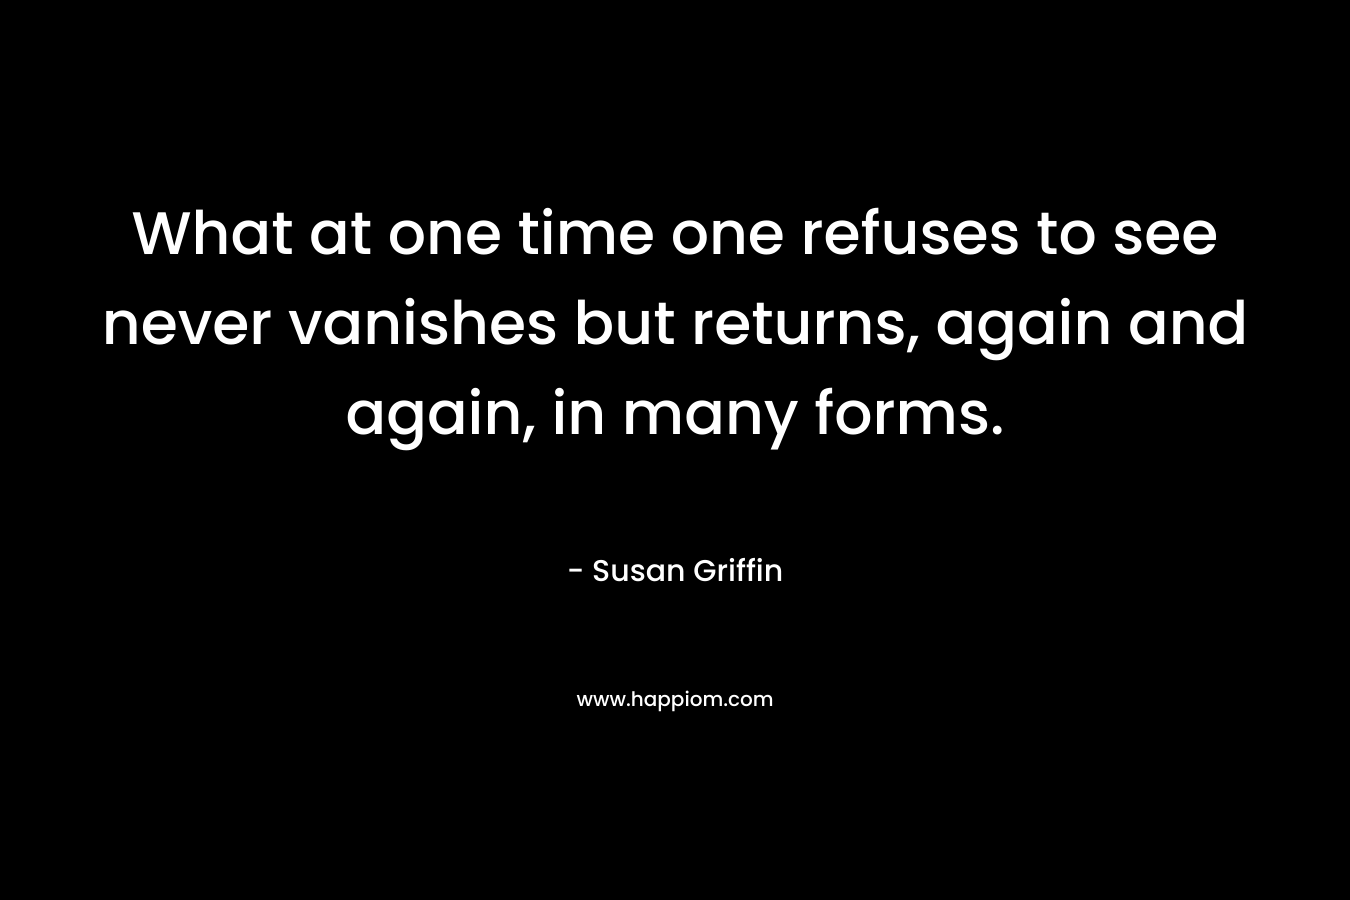 What at one time one refuses to see never vanishes but returns, again and again, in many forms. – Susan Griffin